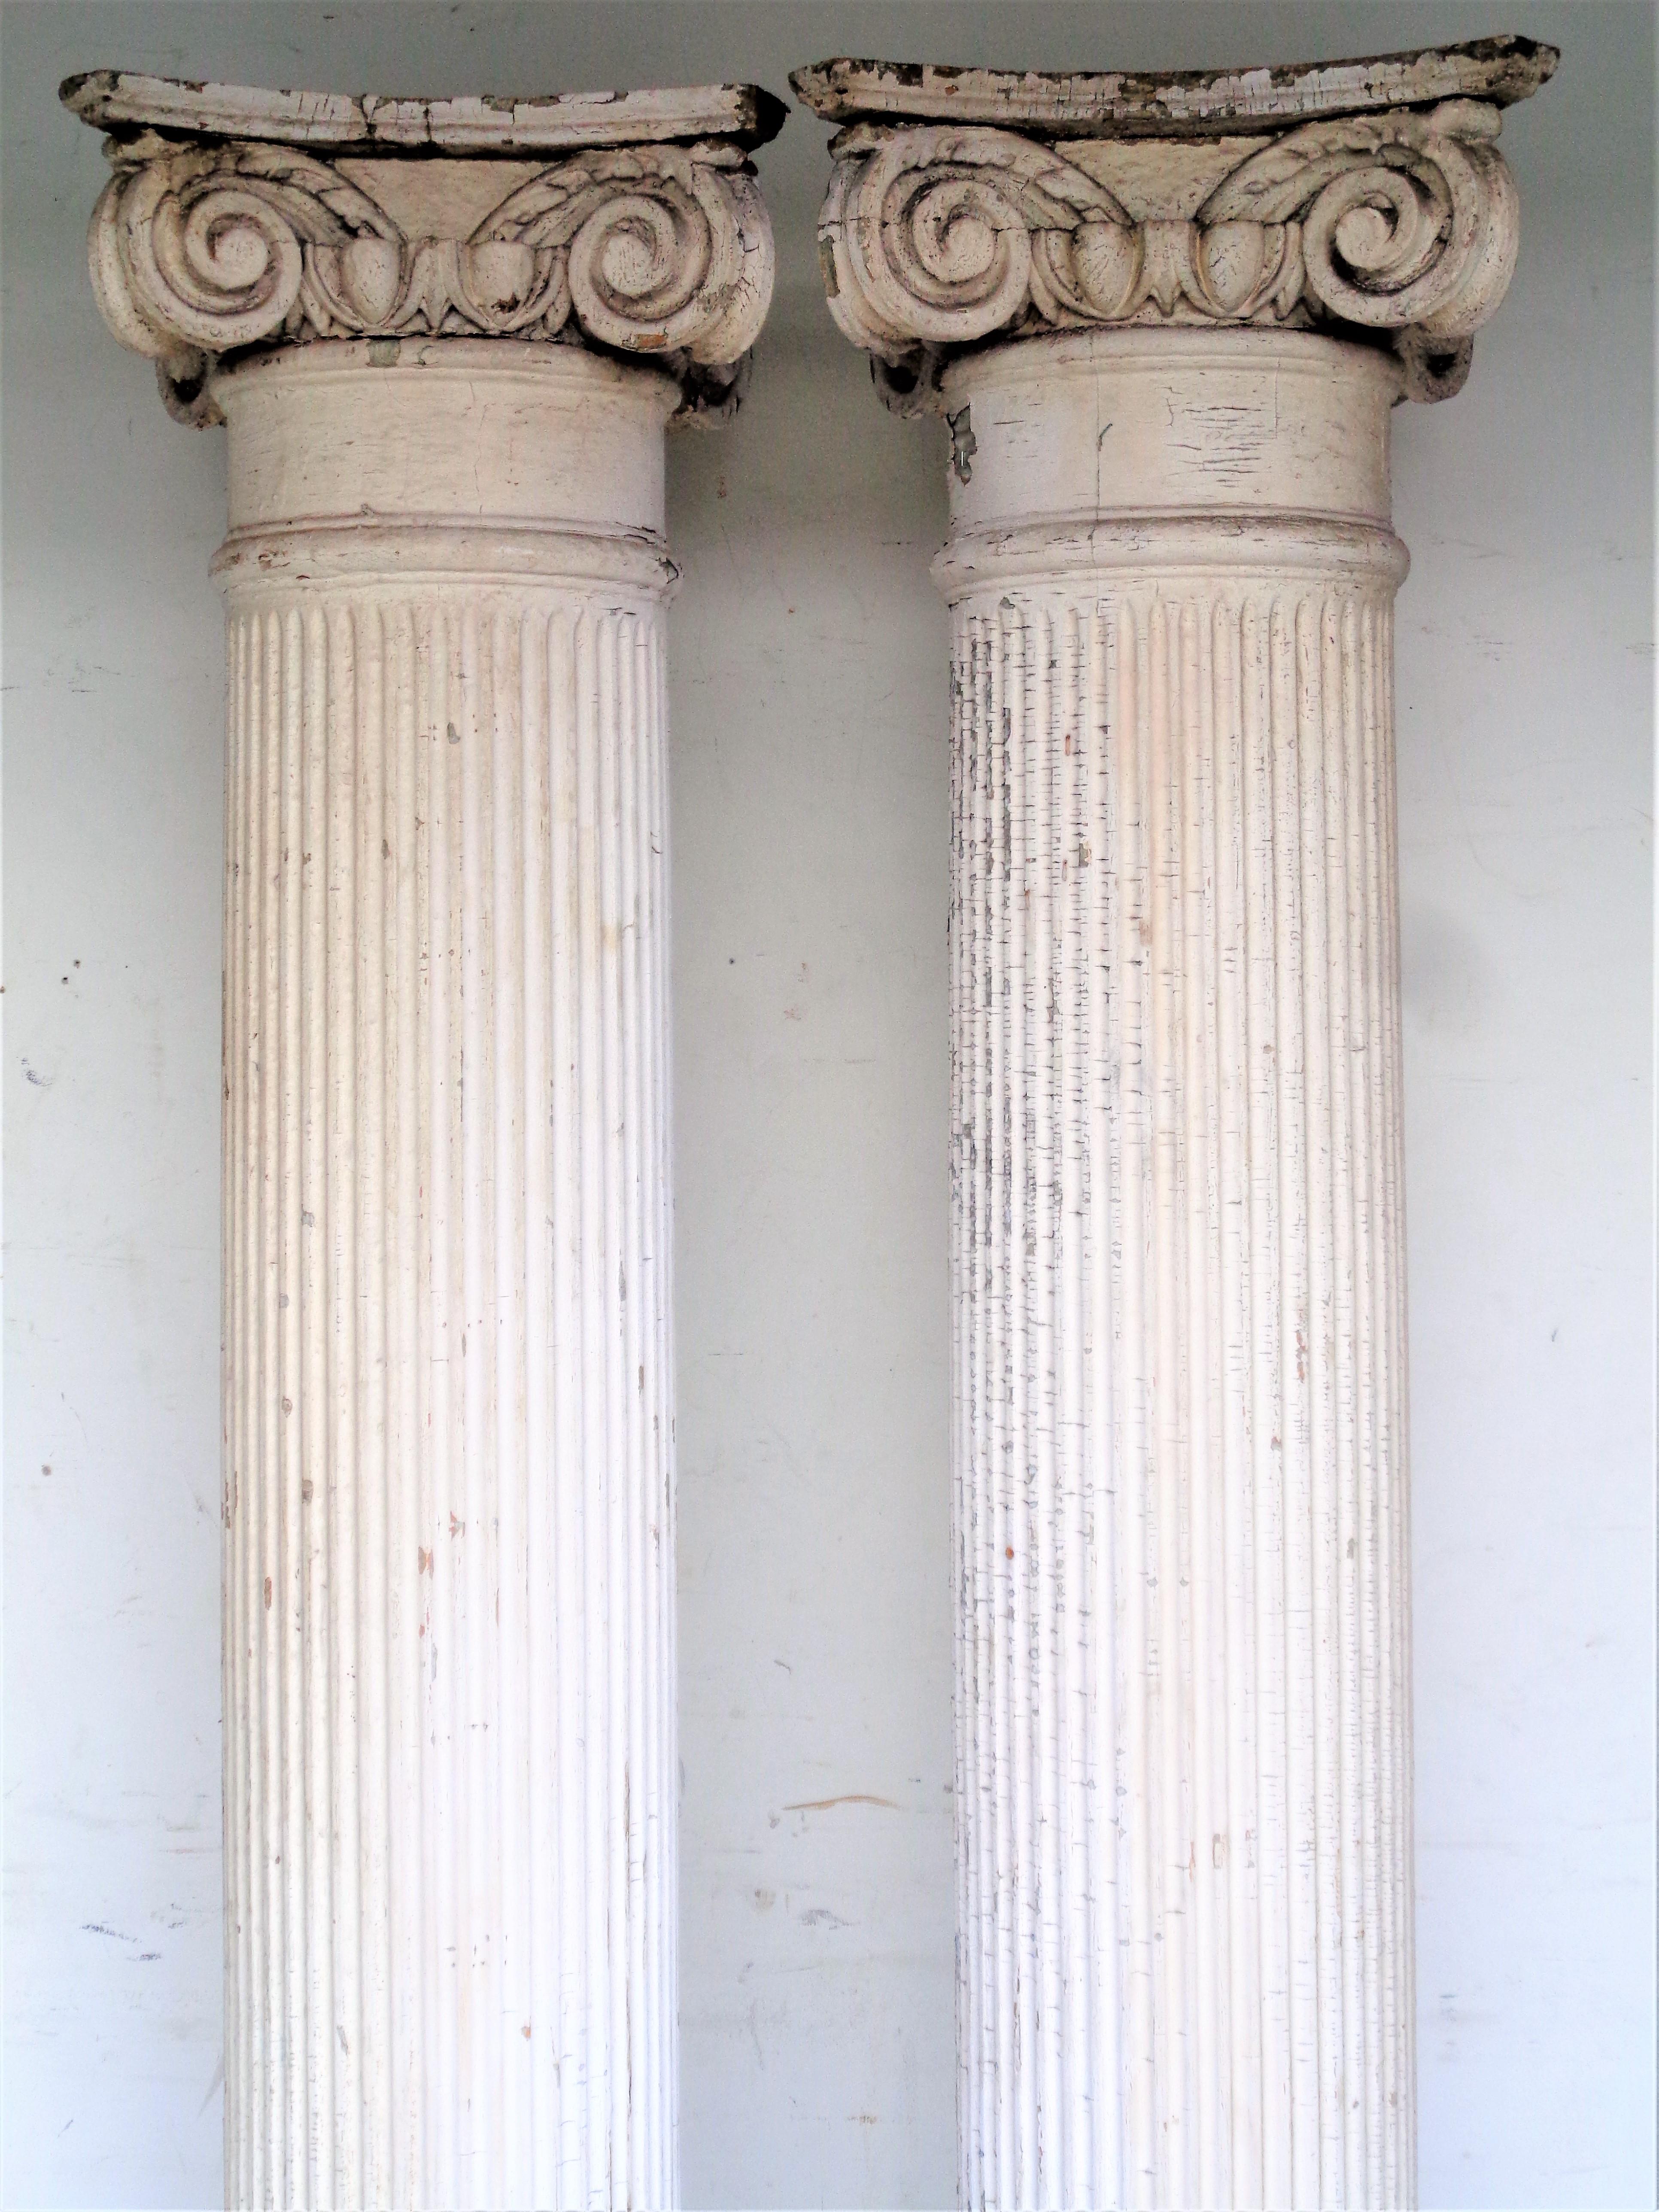 19th C. American Architectural Fluted Columns w/ Ionic Capitals 7